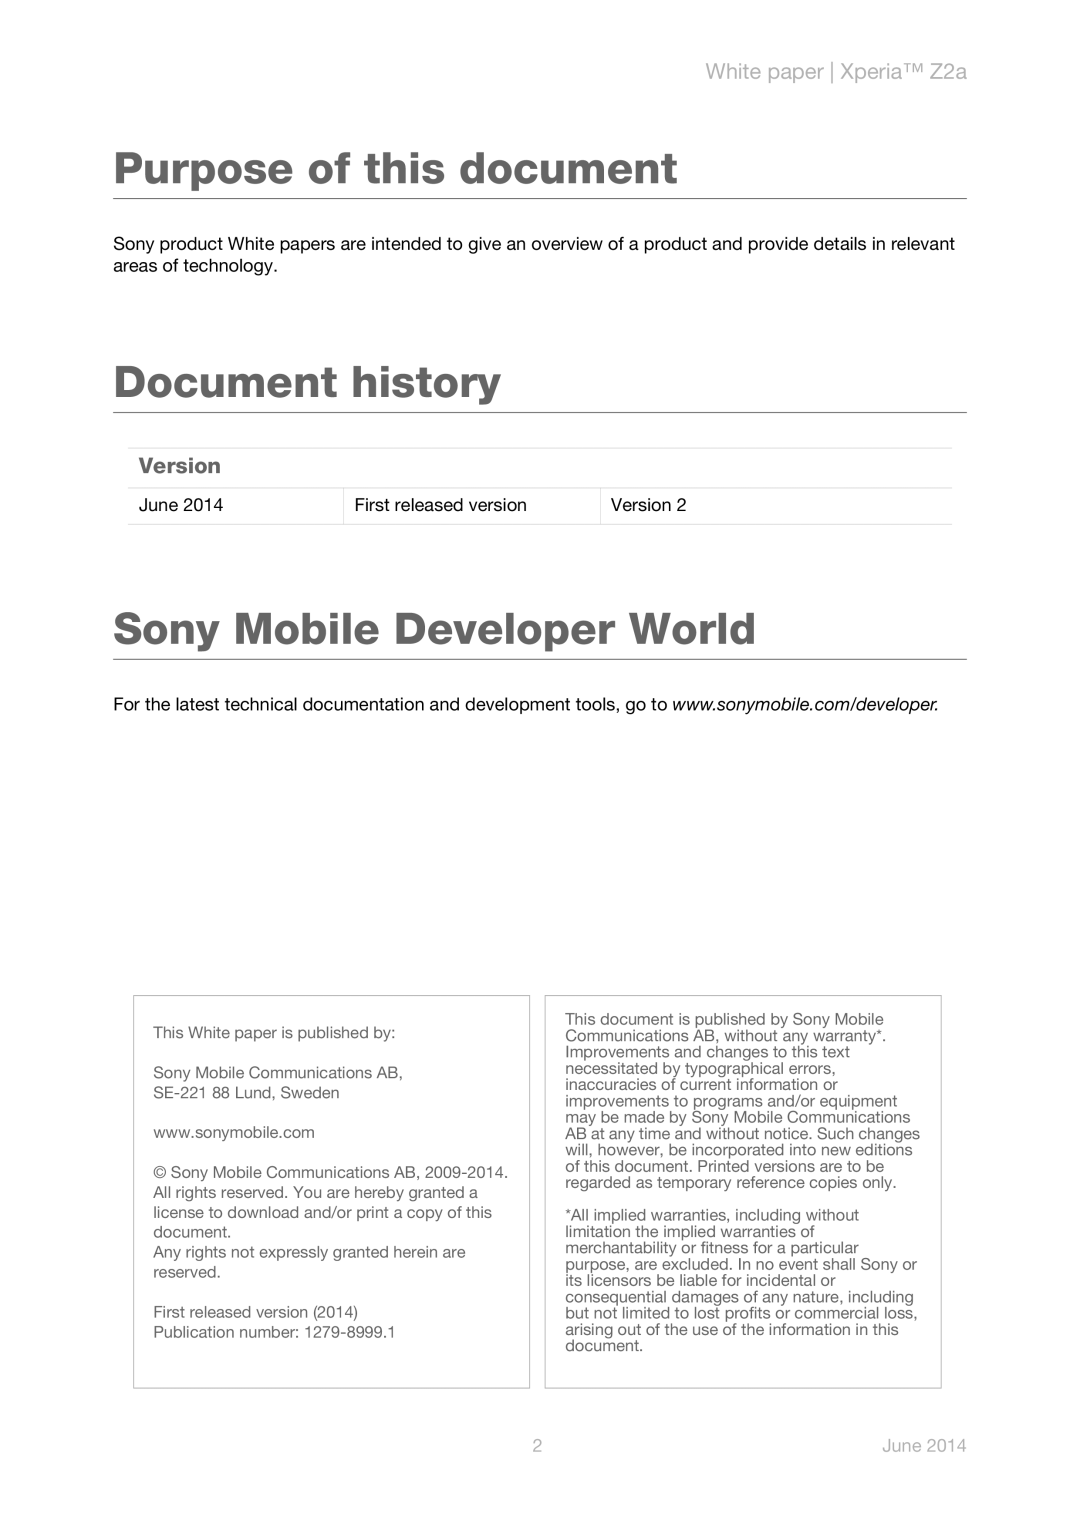 Sony White paper Xperia Z2a, Version, June, Purpose of this document, Document history, Sony Mobile Developer World 